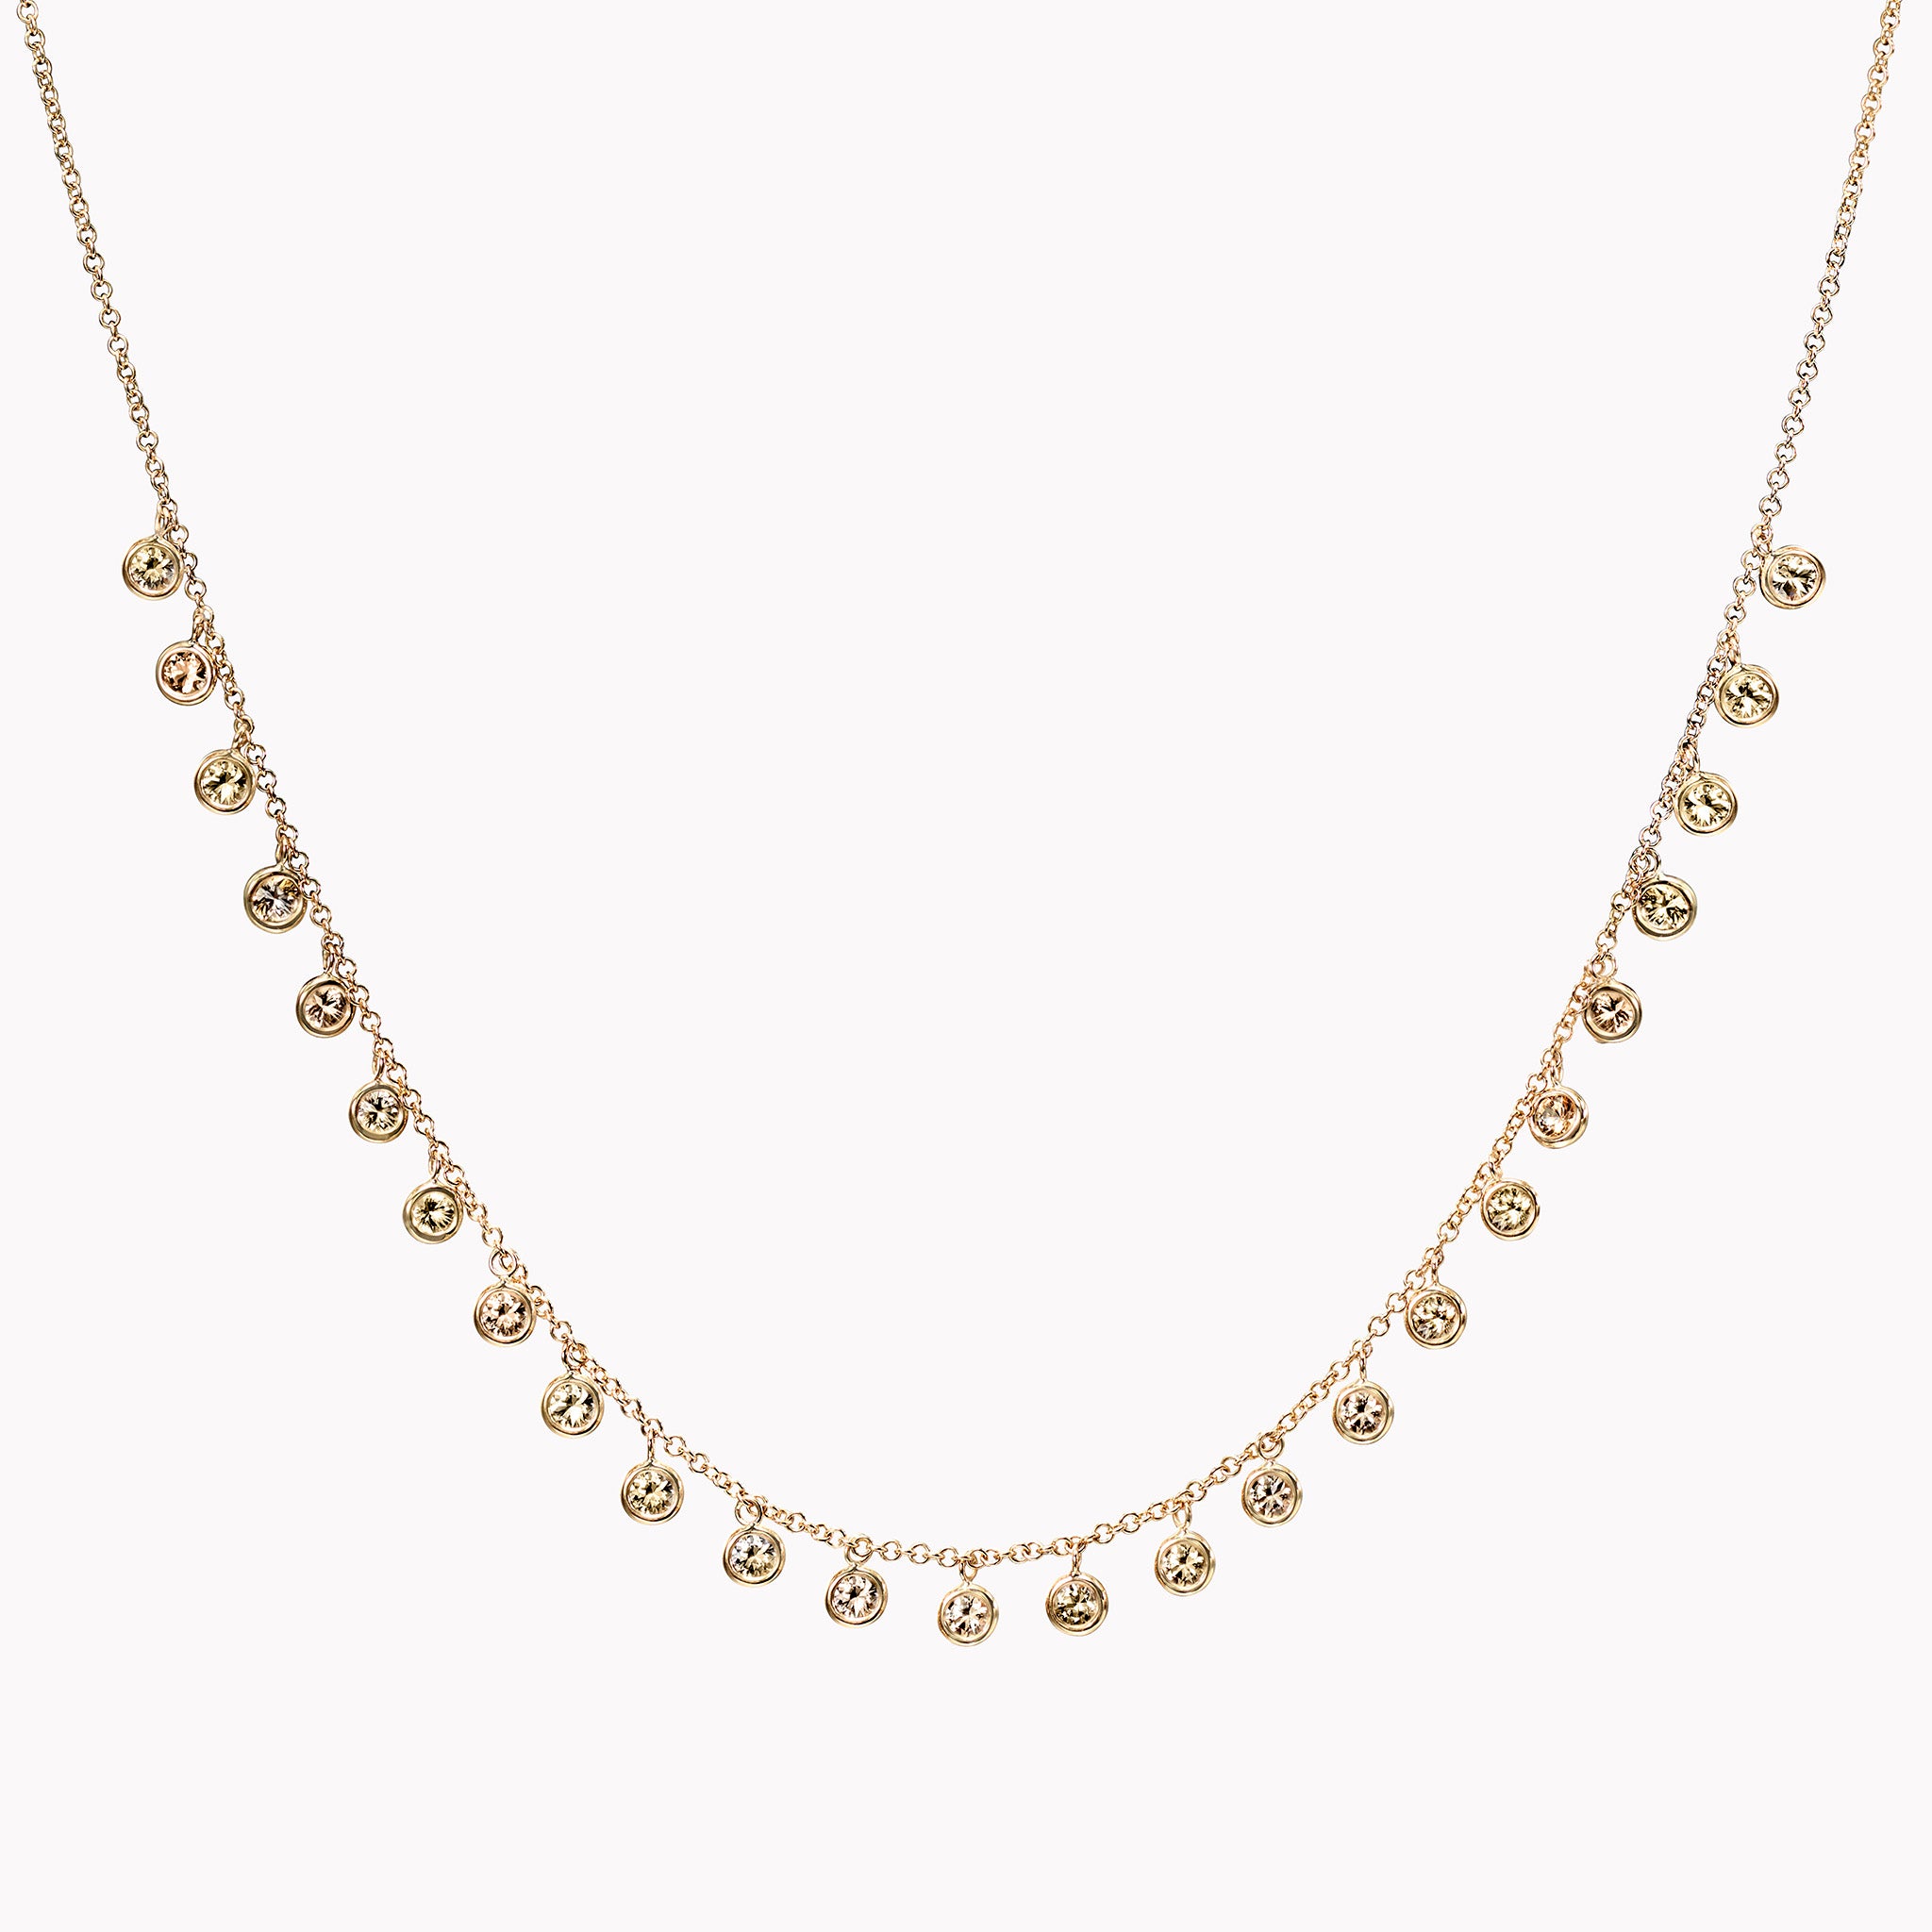 The Golden Hour Necklace